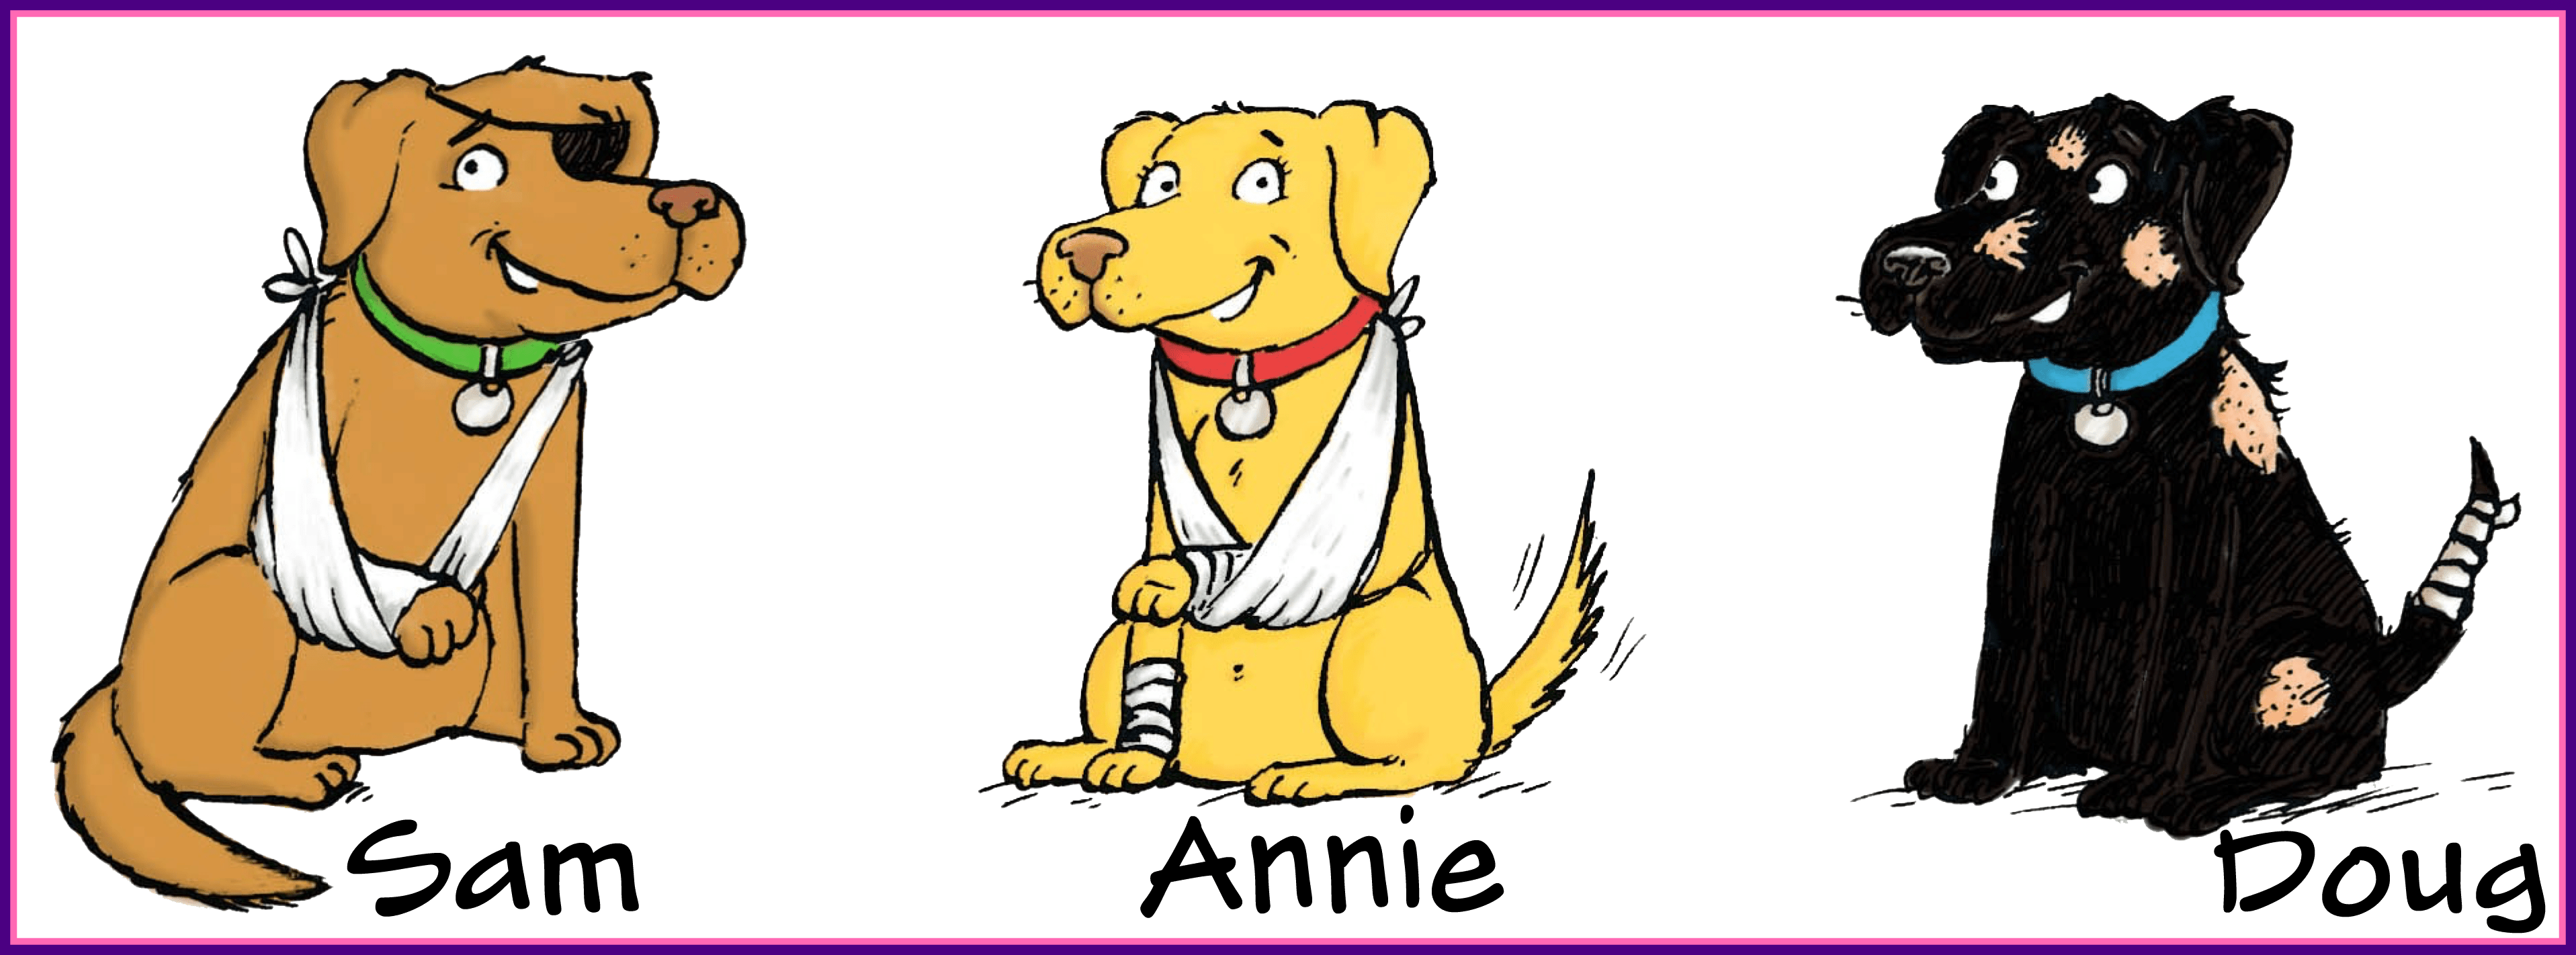 Dog Cartoon Rescue Dog Cartoon Amazing Supported Adopted - Dog Cartoon Rescue Dog Cartoon Amazing Supported Adopted (3834x1422)